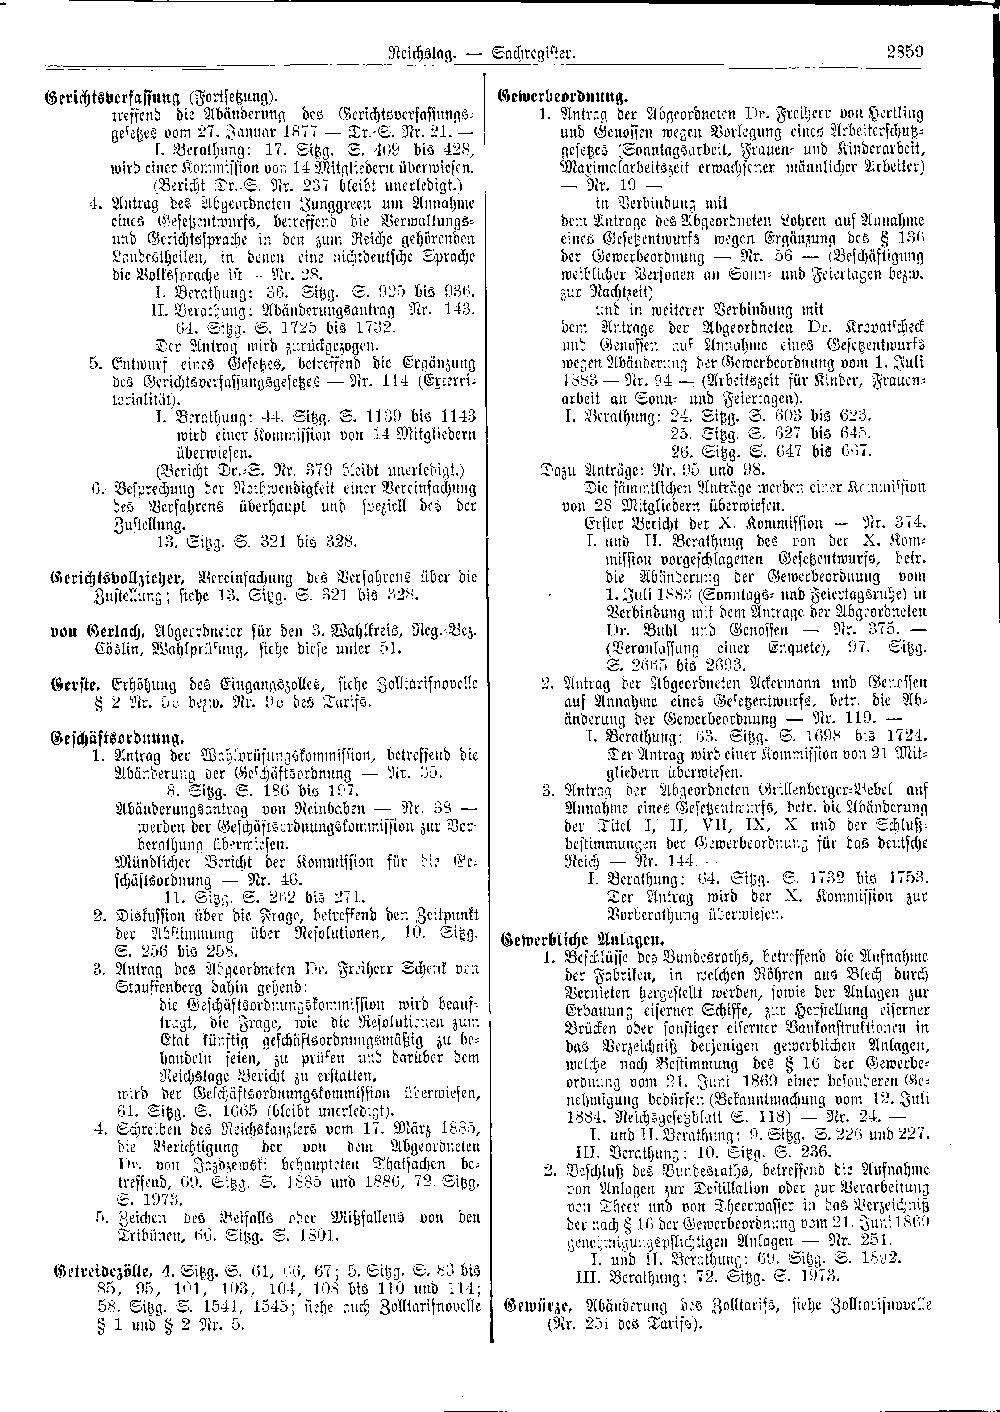 Scan of page 2859